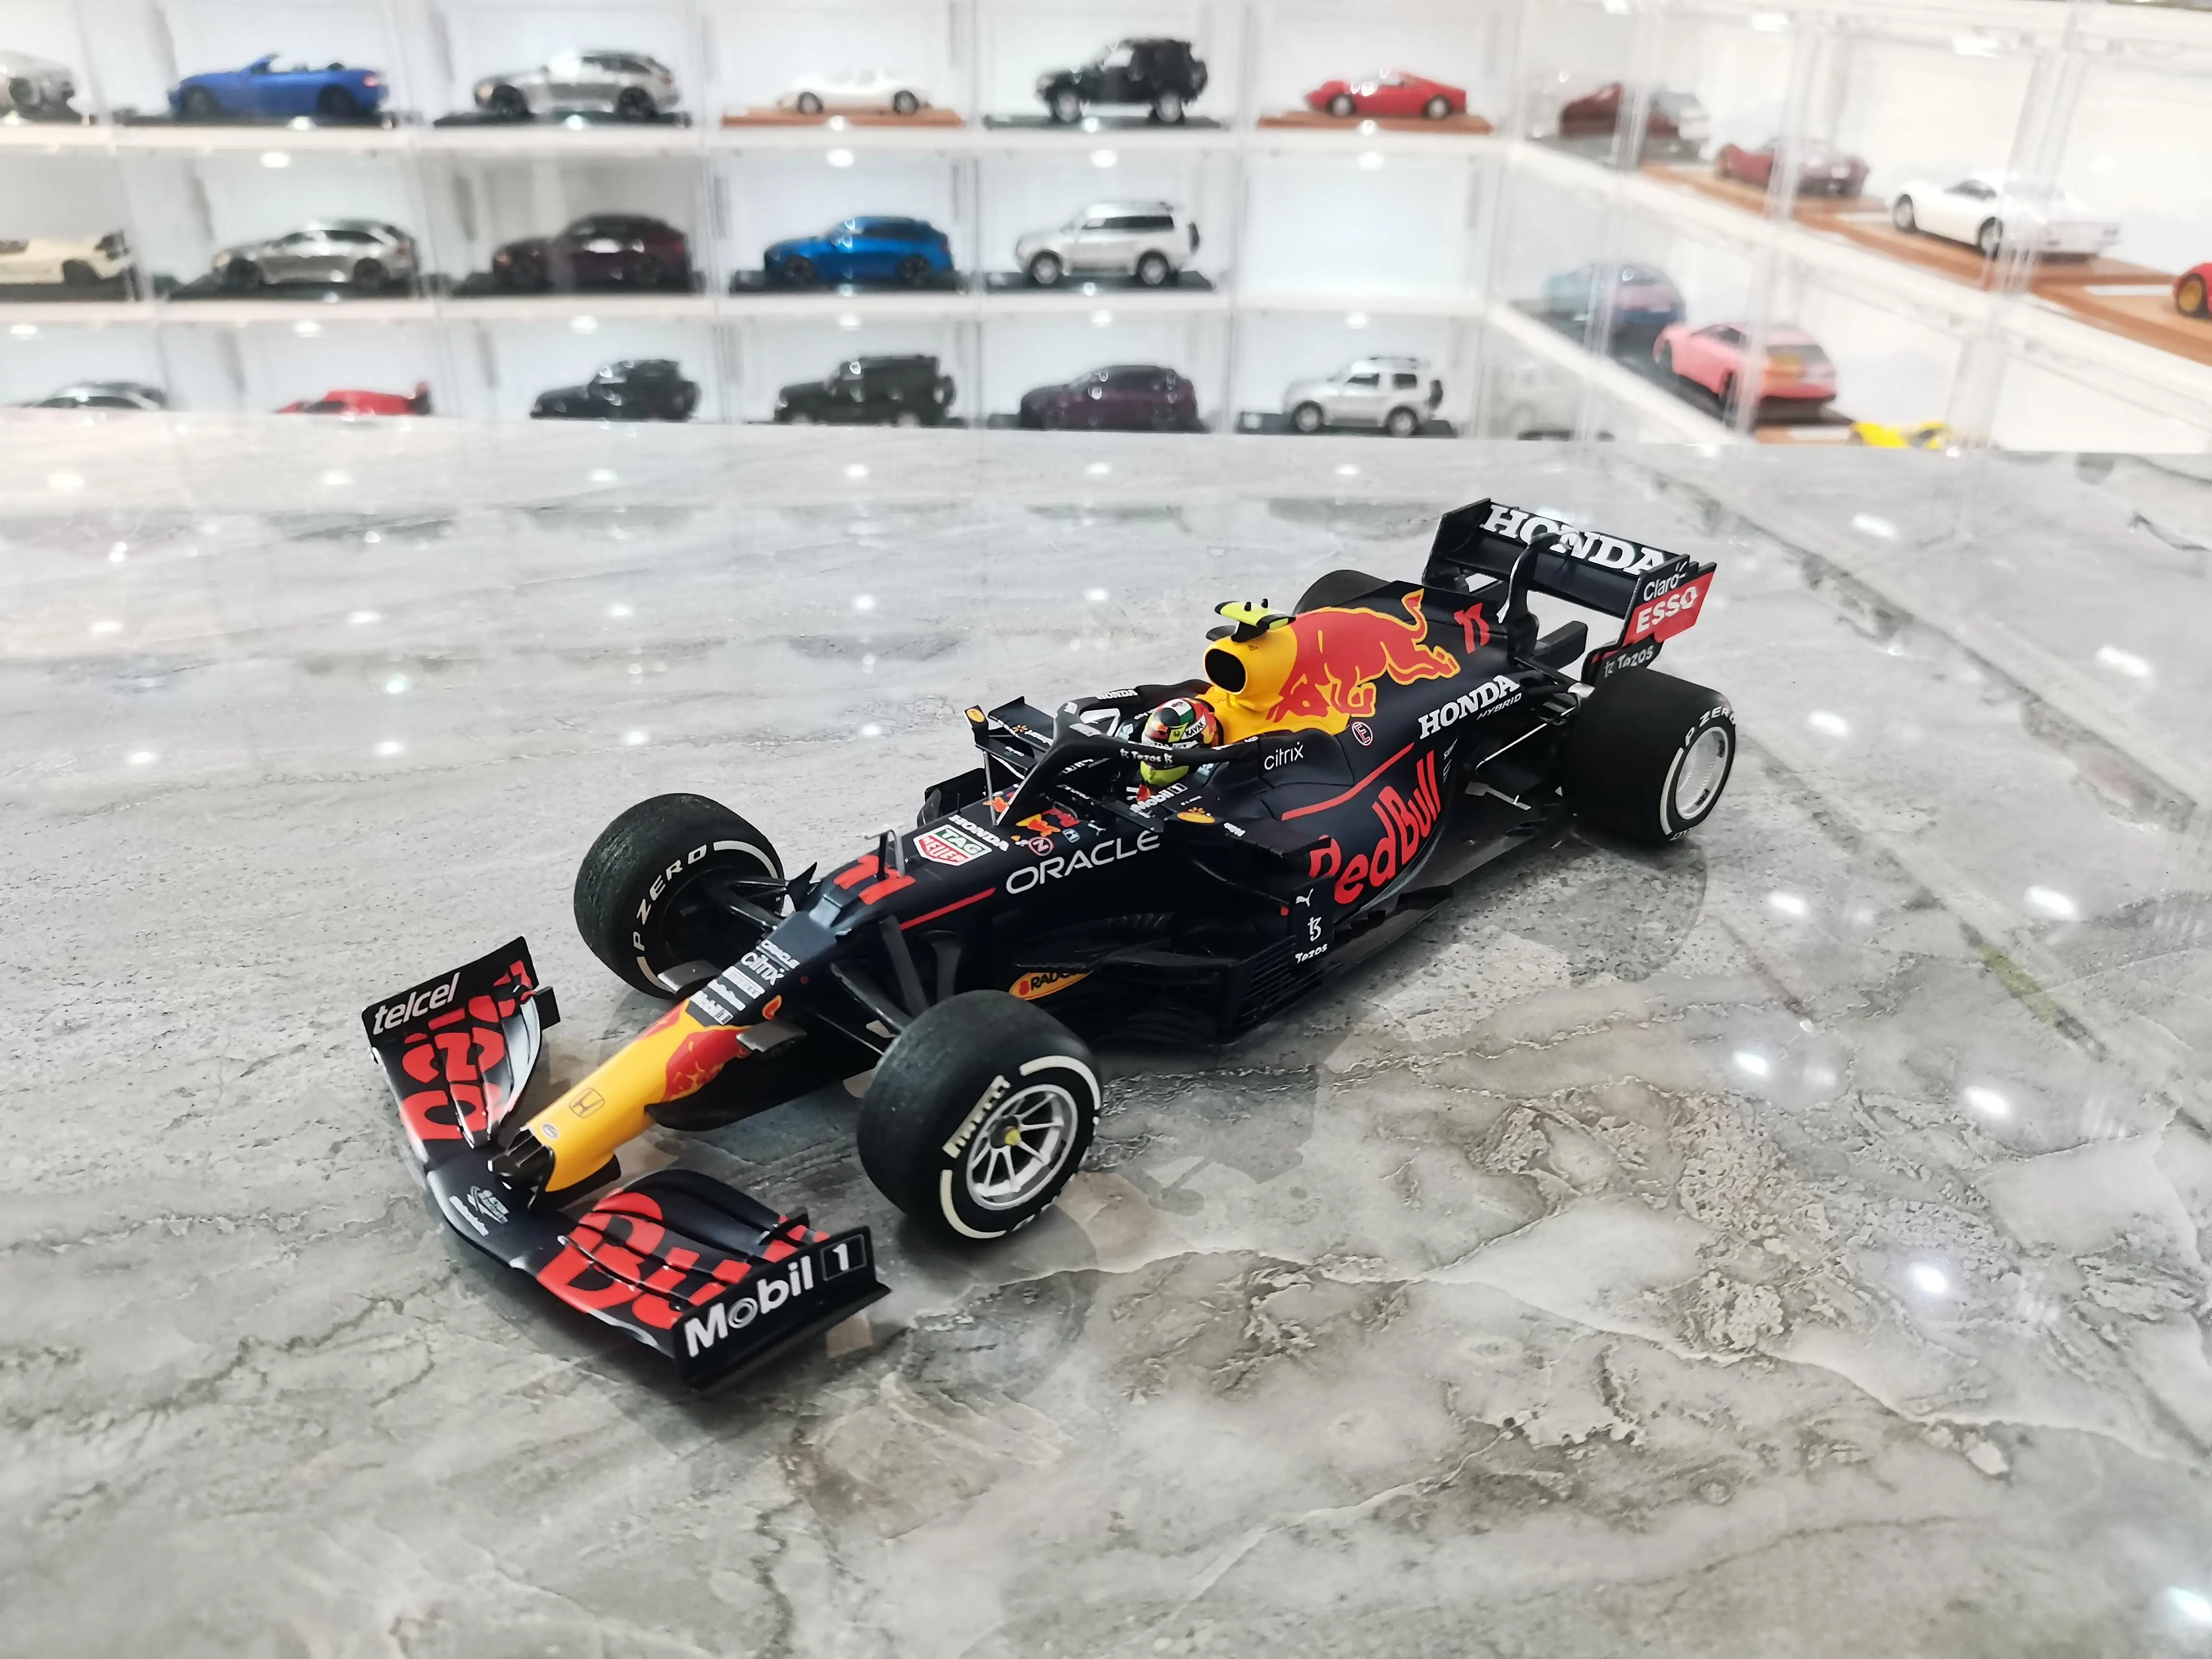 MINICHAMPS 1/18 For Honda Red Bull Racing RB16B F1 #11 Perez Monaco Model  Car Gifts Toys Hobby Ornaments Display Collection